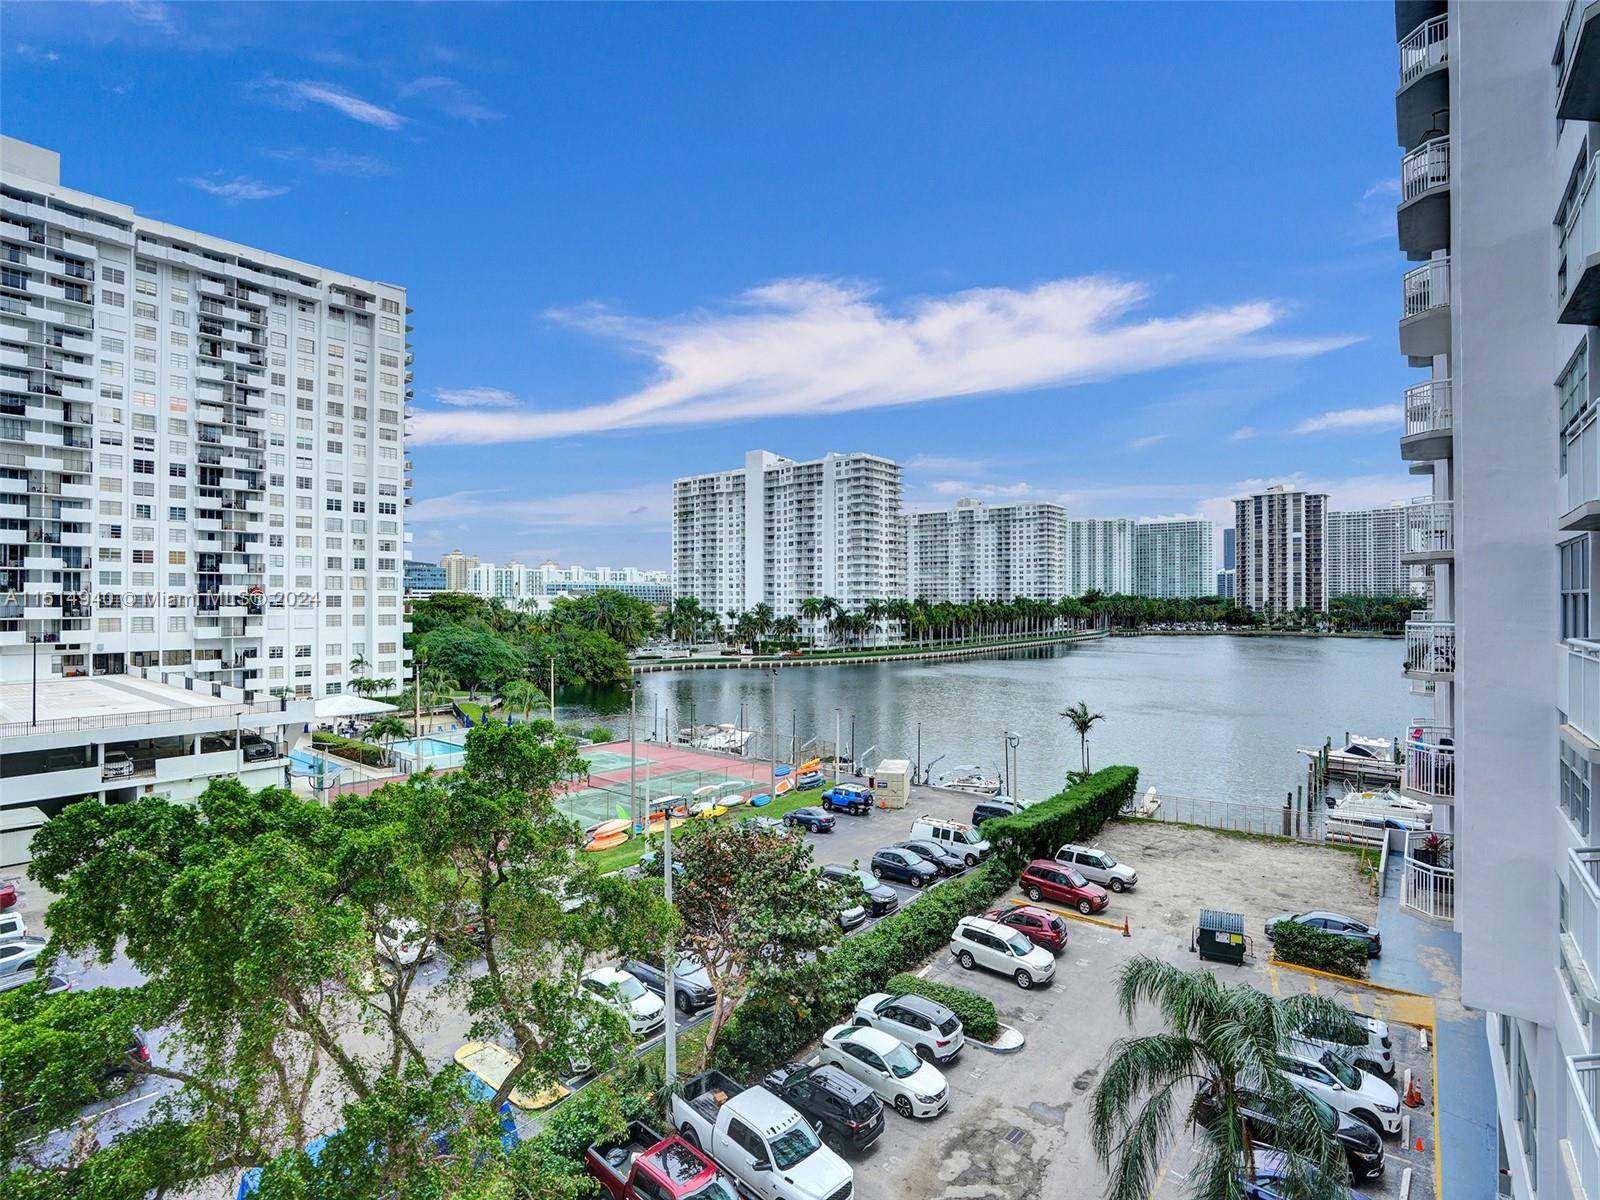 This 2 bedroom, 2 bathroom apartment is the real deal offering waterfront living, outstanding amenities, and a location that's truly hard to beat.